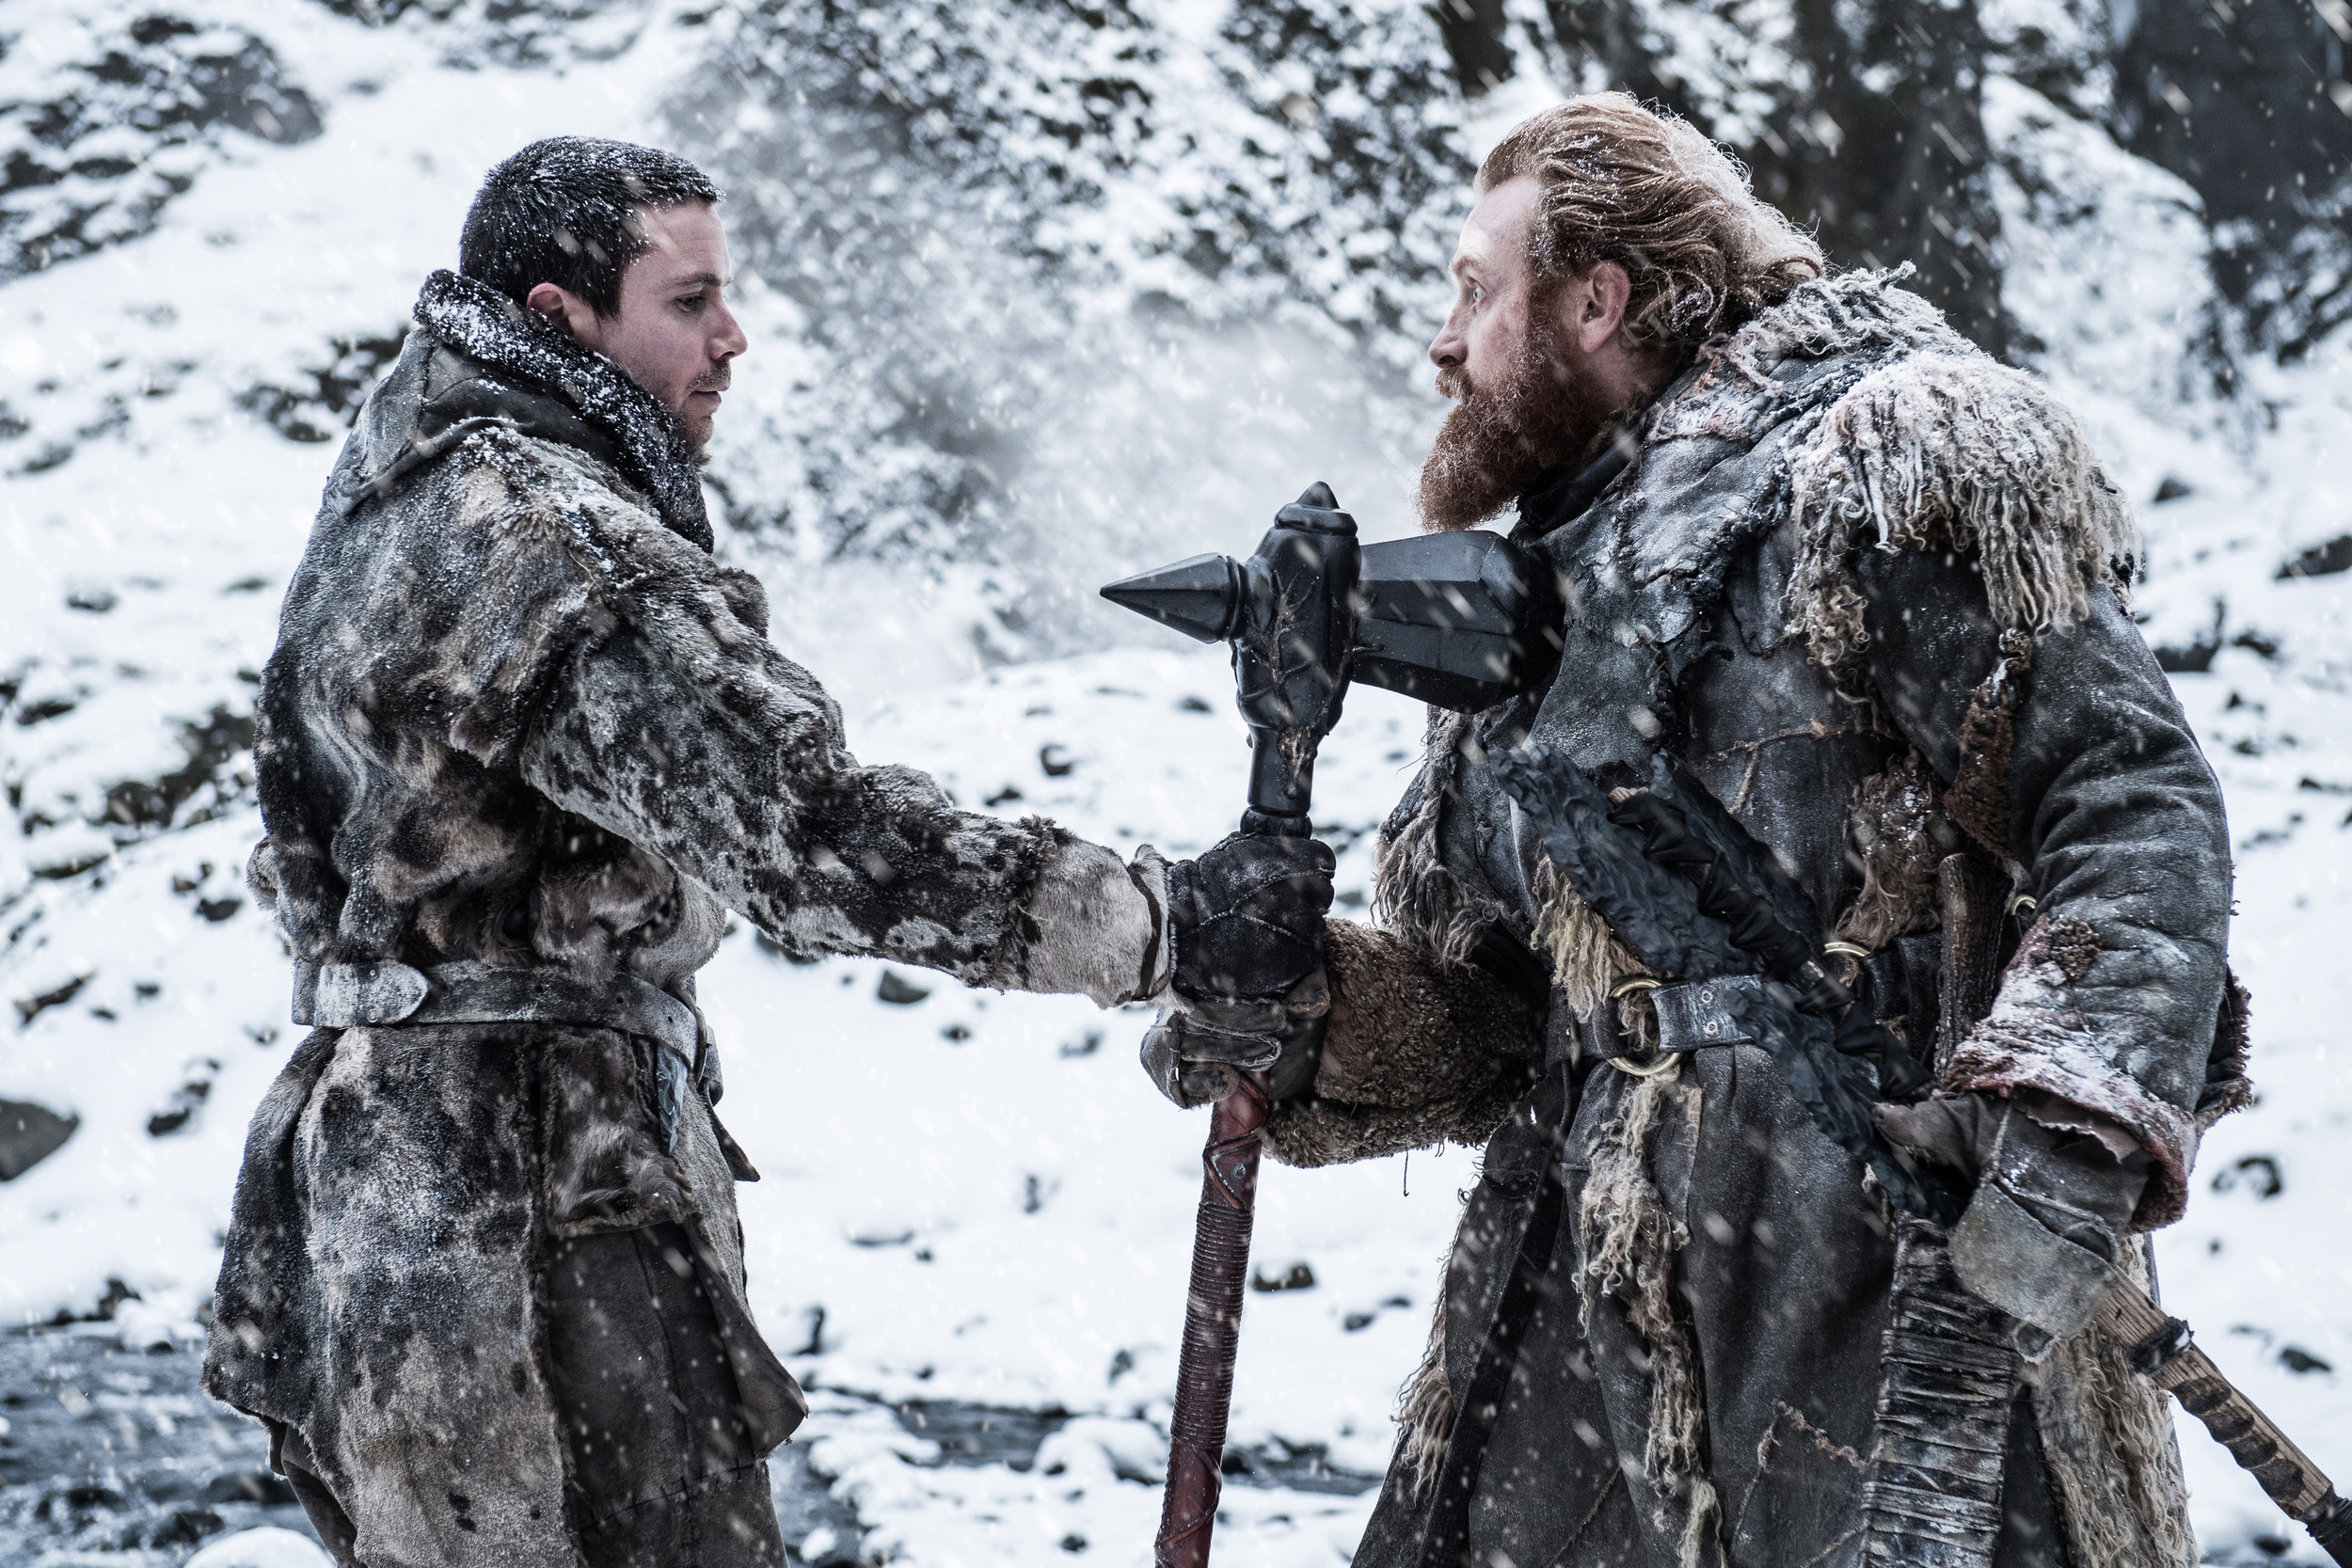 <p>When <span><em>Game of Thrones</em> </span>premiered in 2011, it marked a true watershed moment in TV, proving that fantasy could make for compelling watching. It was going strong until the eighth season, but it quickly became clear that the showrunners were at something of a loss. Though Daenerys’ turn to madness is often seen as the nadir, the signs are there, particularly the instant when Gendry is ordered to run back to the Wall, even though they are miles away. All of this was truly a shame, and these vexing moments tarnished the series’ reputation for years. </p><p><a href='https://www.msn.com/en-us/community/channel/vid-cj9pqbr0vn9in2b6ddcd8sfgpfq6x6utp44fssrv6mc2gtybw0us'>Follow us on MSN to see more of our exclusive entertainment content.</a></p>